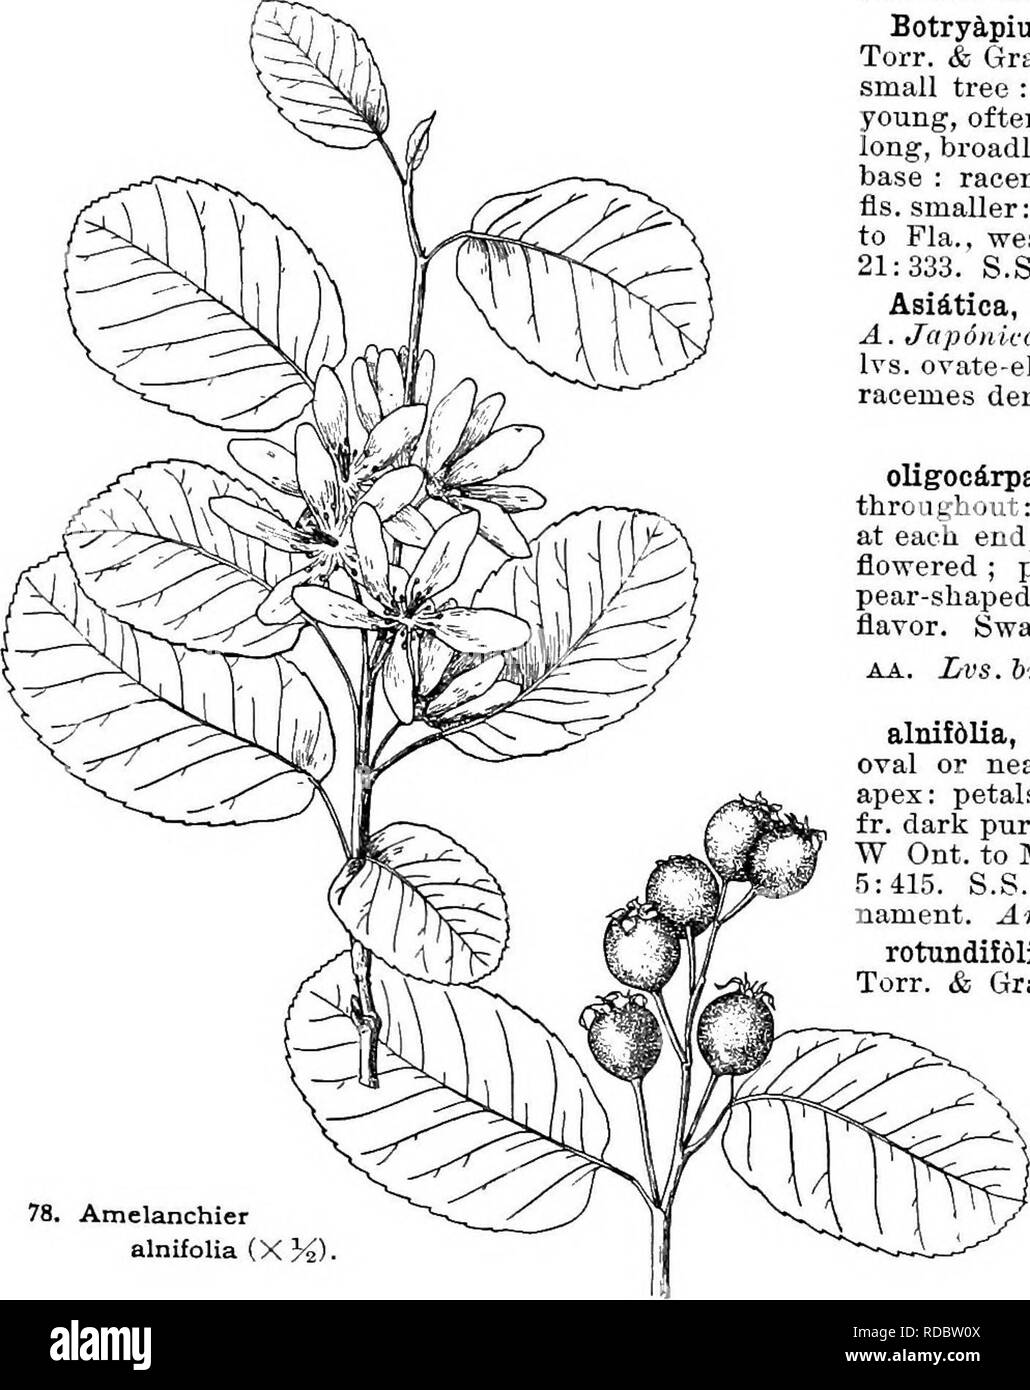 . Cyclopedia of American horticulture, comprising suggestions for cultivation of horticultural plants, descriptions of the species of fruits, vegetables, flowers, and ornamental plants sold in the United States and Canada, together with geographical and biographical sketches. Gardening. AMASONIA AMASOiriA (after Thomas Amason, early American traveler), ^'erbendcea. Greenhouse shrub from Trini- dad, with long, tubular, hairy yellow fls. and bright red bracts, which remain attractive two or three months at a time. calyoina, Hook. f. {A.punicea,'Rort. notVahl.). Lvs. 6-12 in. long, elliptic, acum Stock Photo